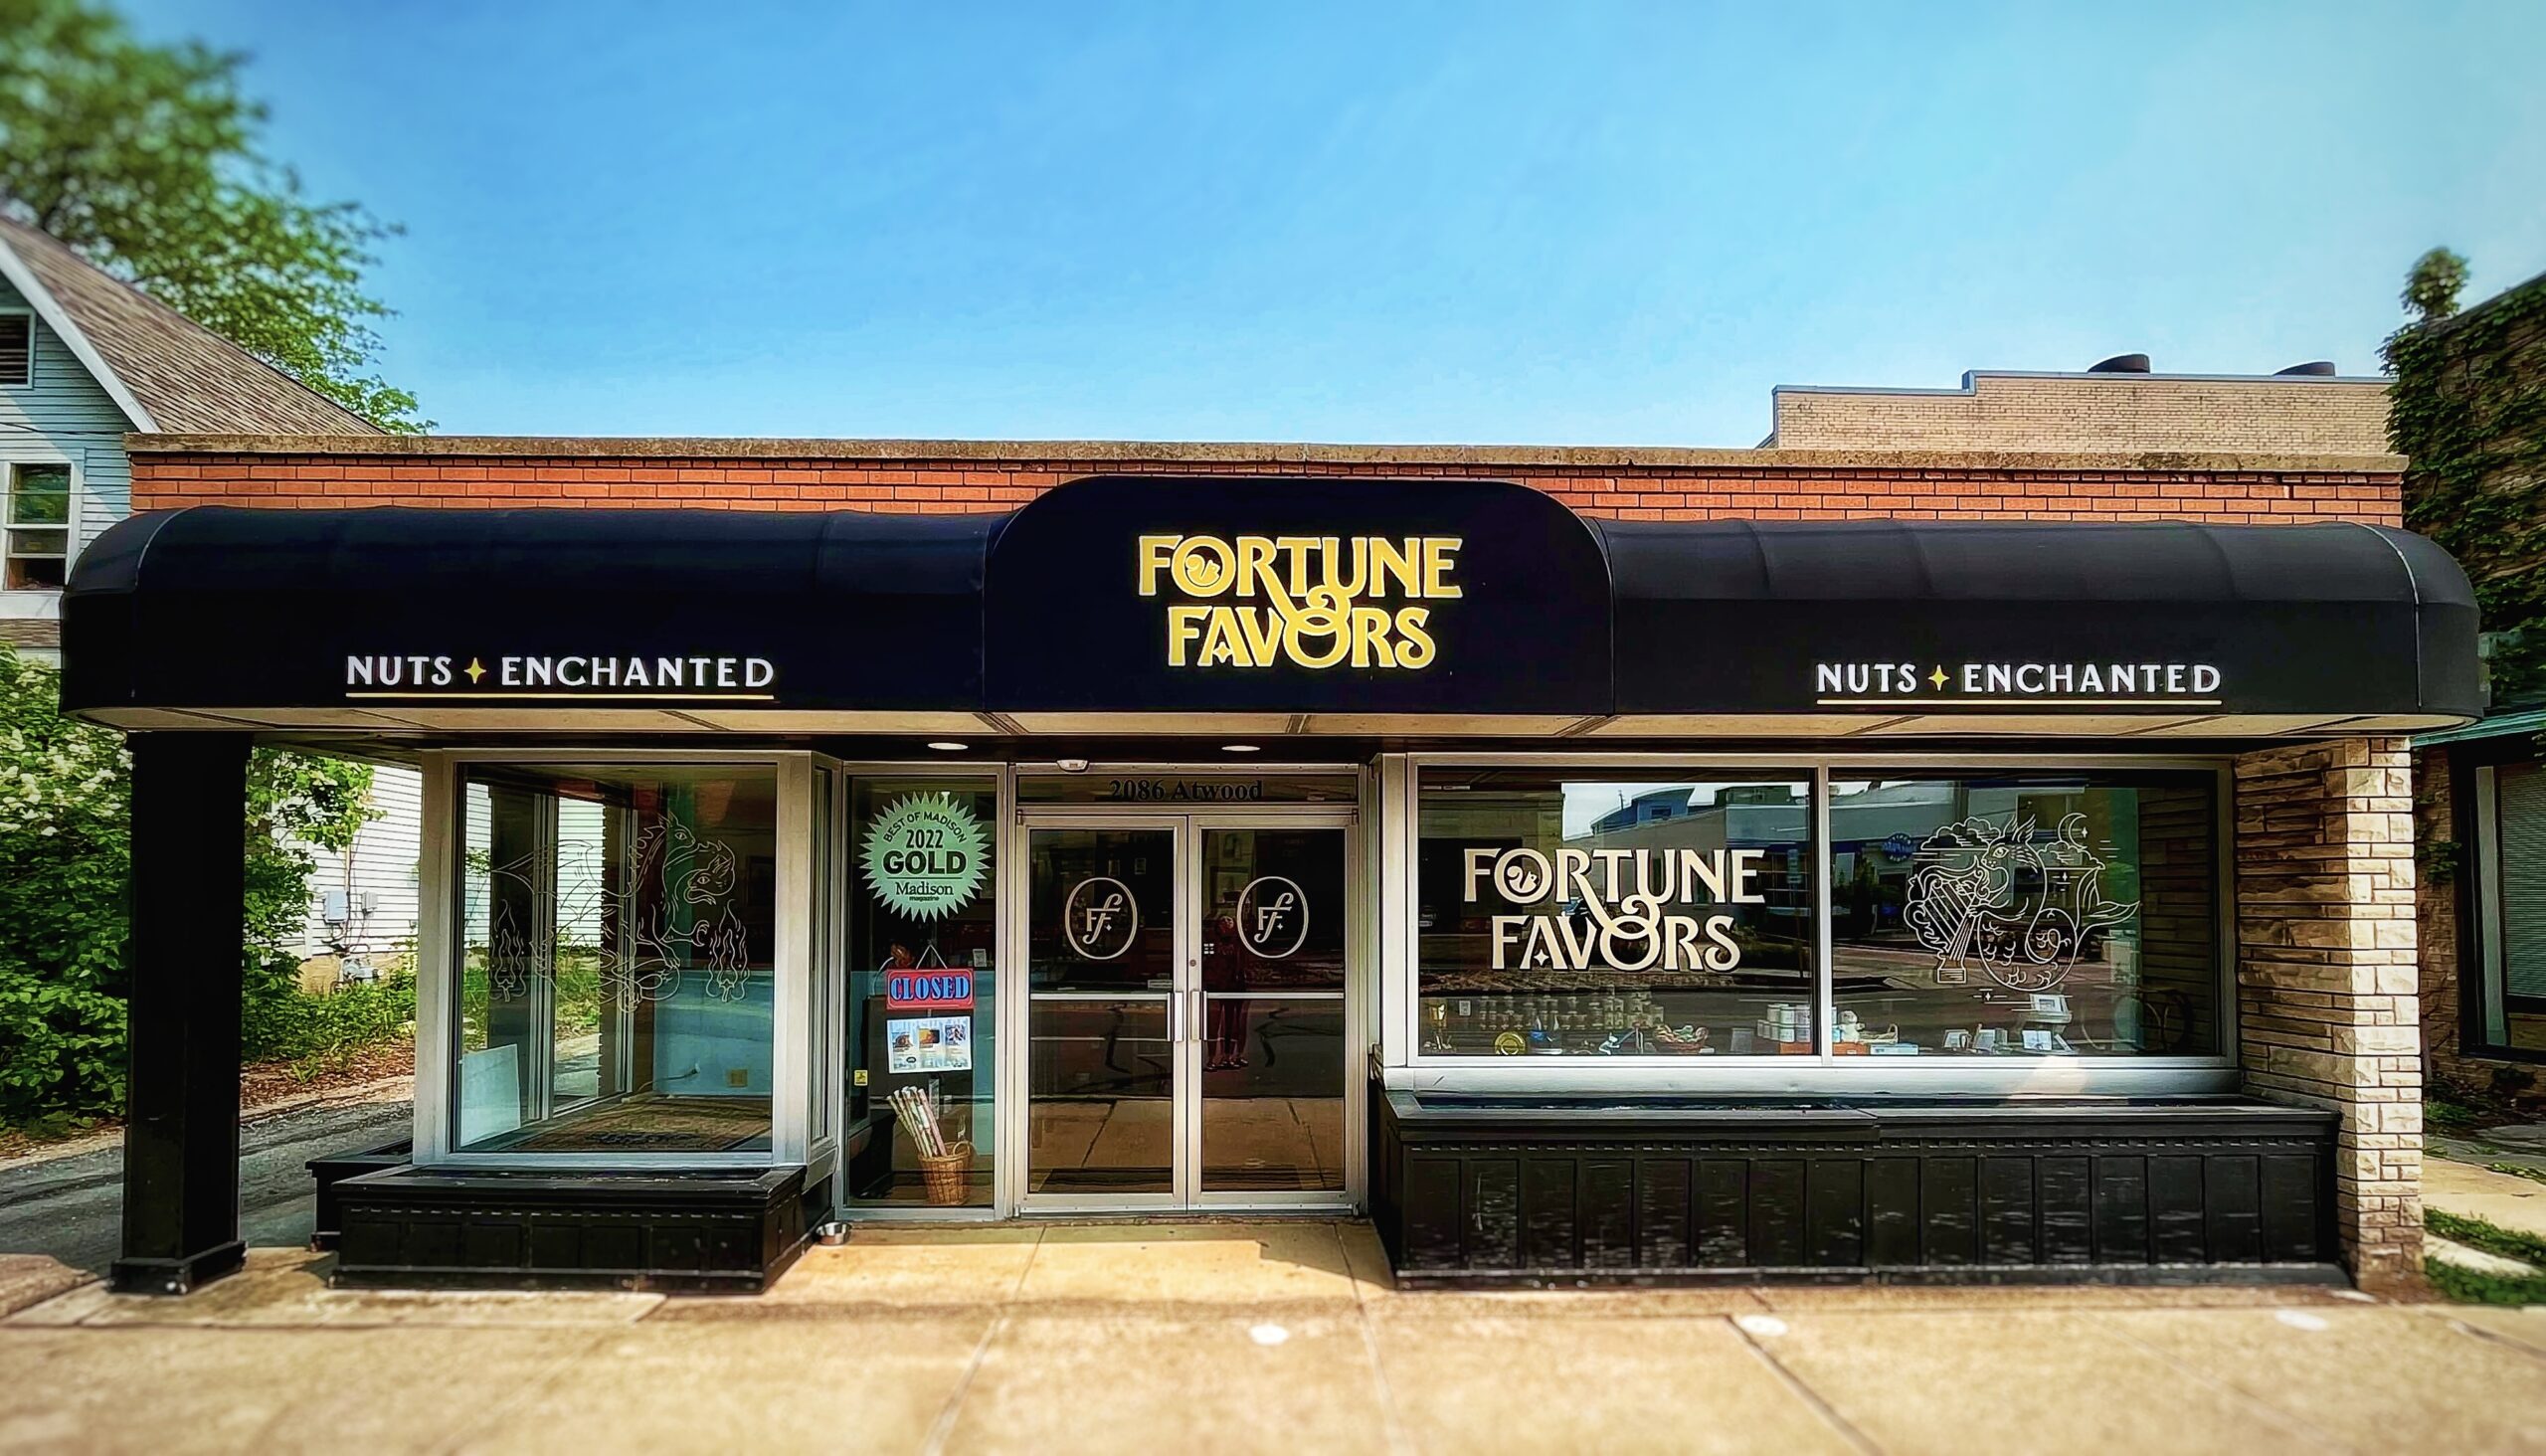 The flagship retail location of Fortune Favors is located on Atwood Avenue in Madison.